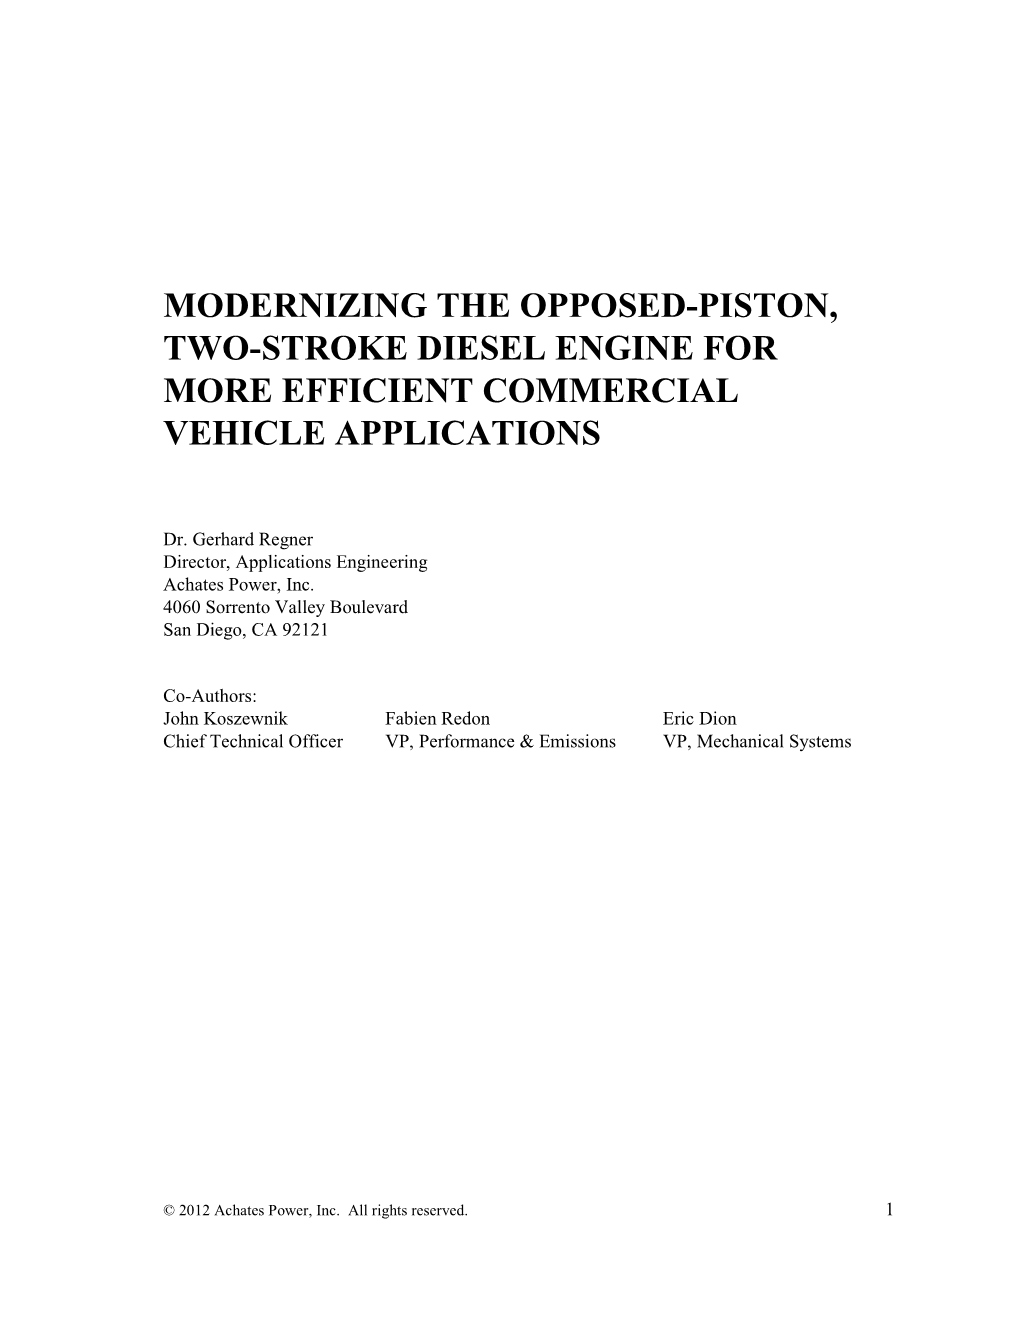 Modernizing the Opposed-Piston, Two-Stroke Diesel Engine for More Efficient Commercial Vehicle Applications